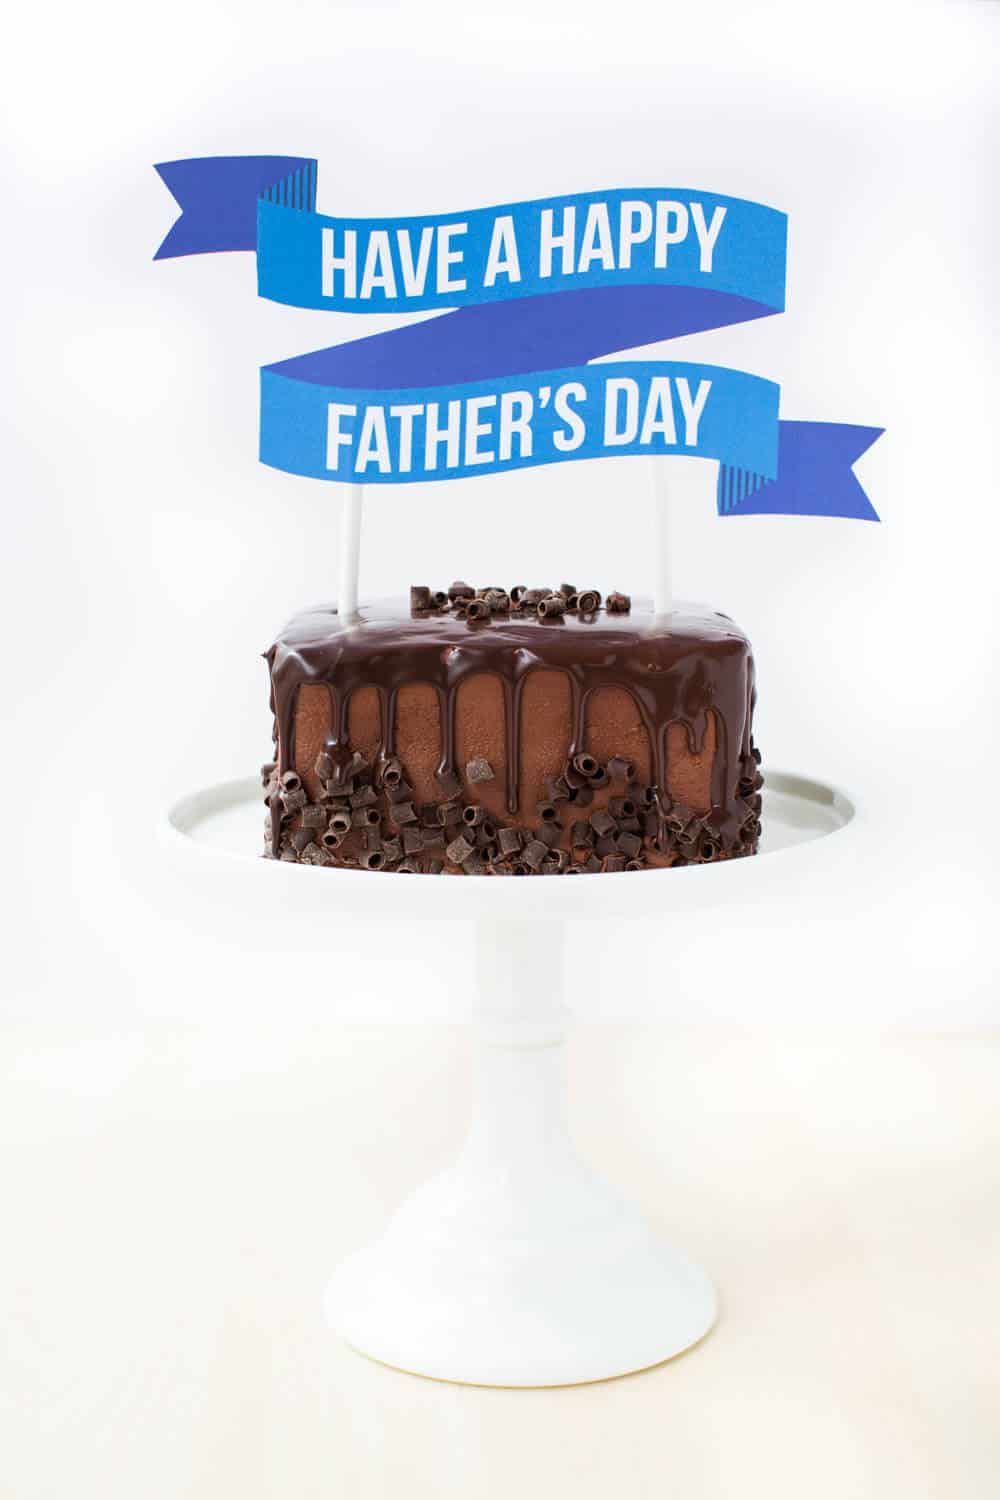 Spoil Dad with a Delicious Father's Day Cake Poster!